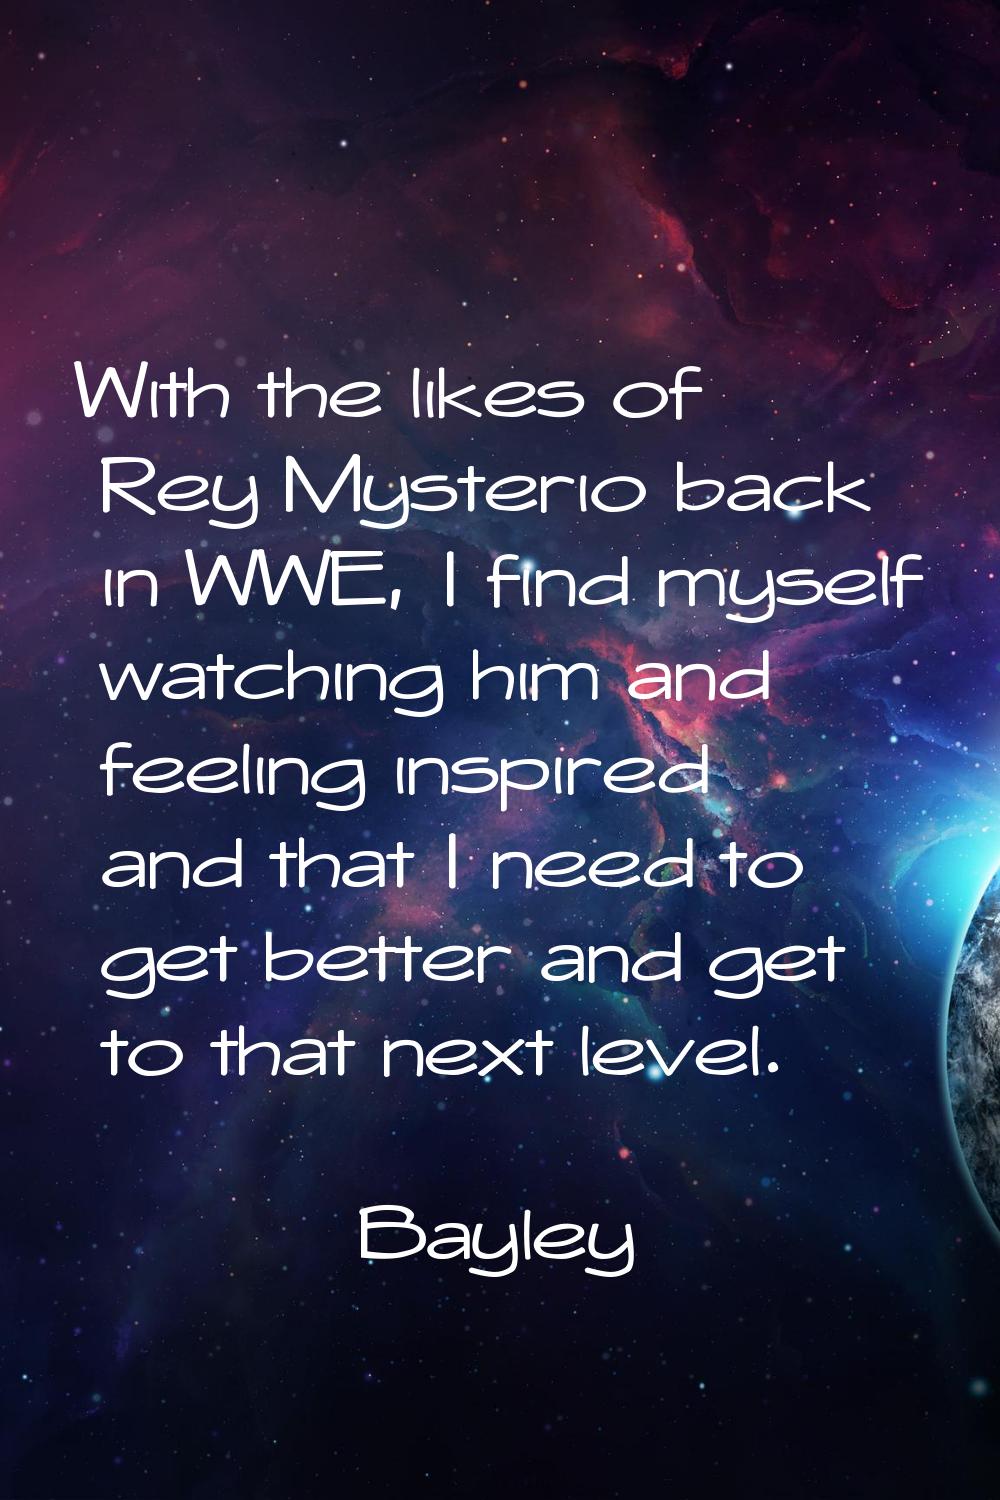 With the likes of Rey Mysterio back in WWE, I find myself watching him and feeling inspired and tha